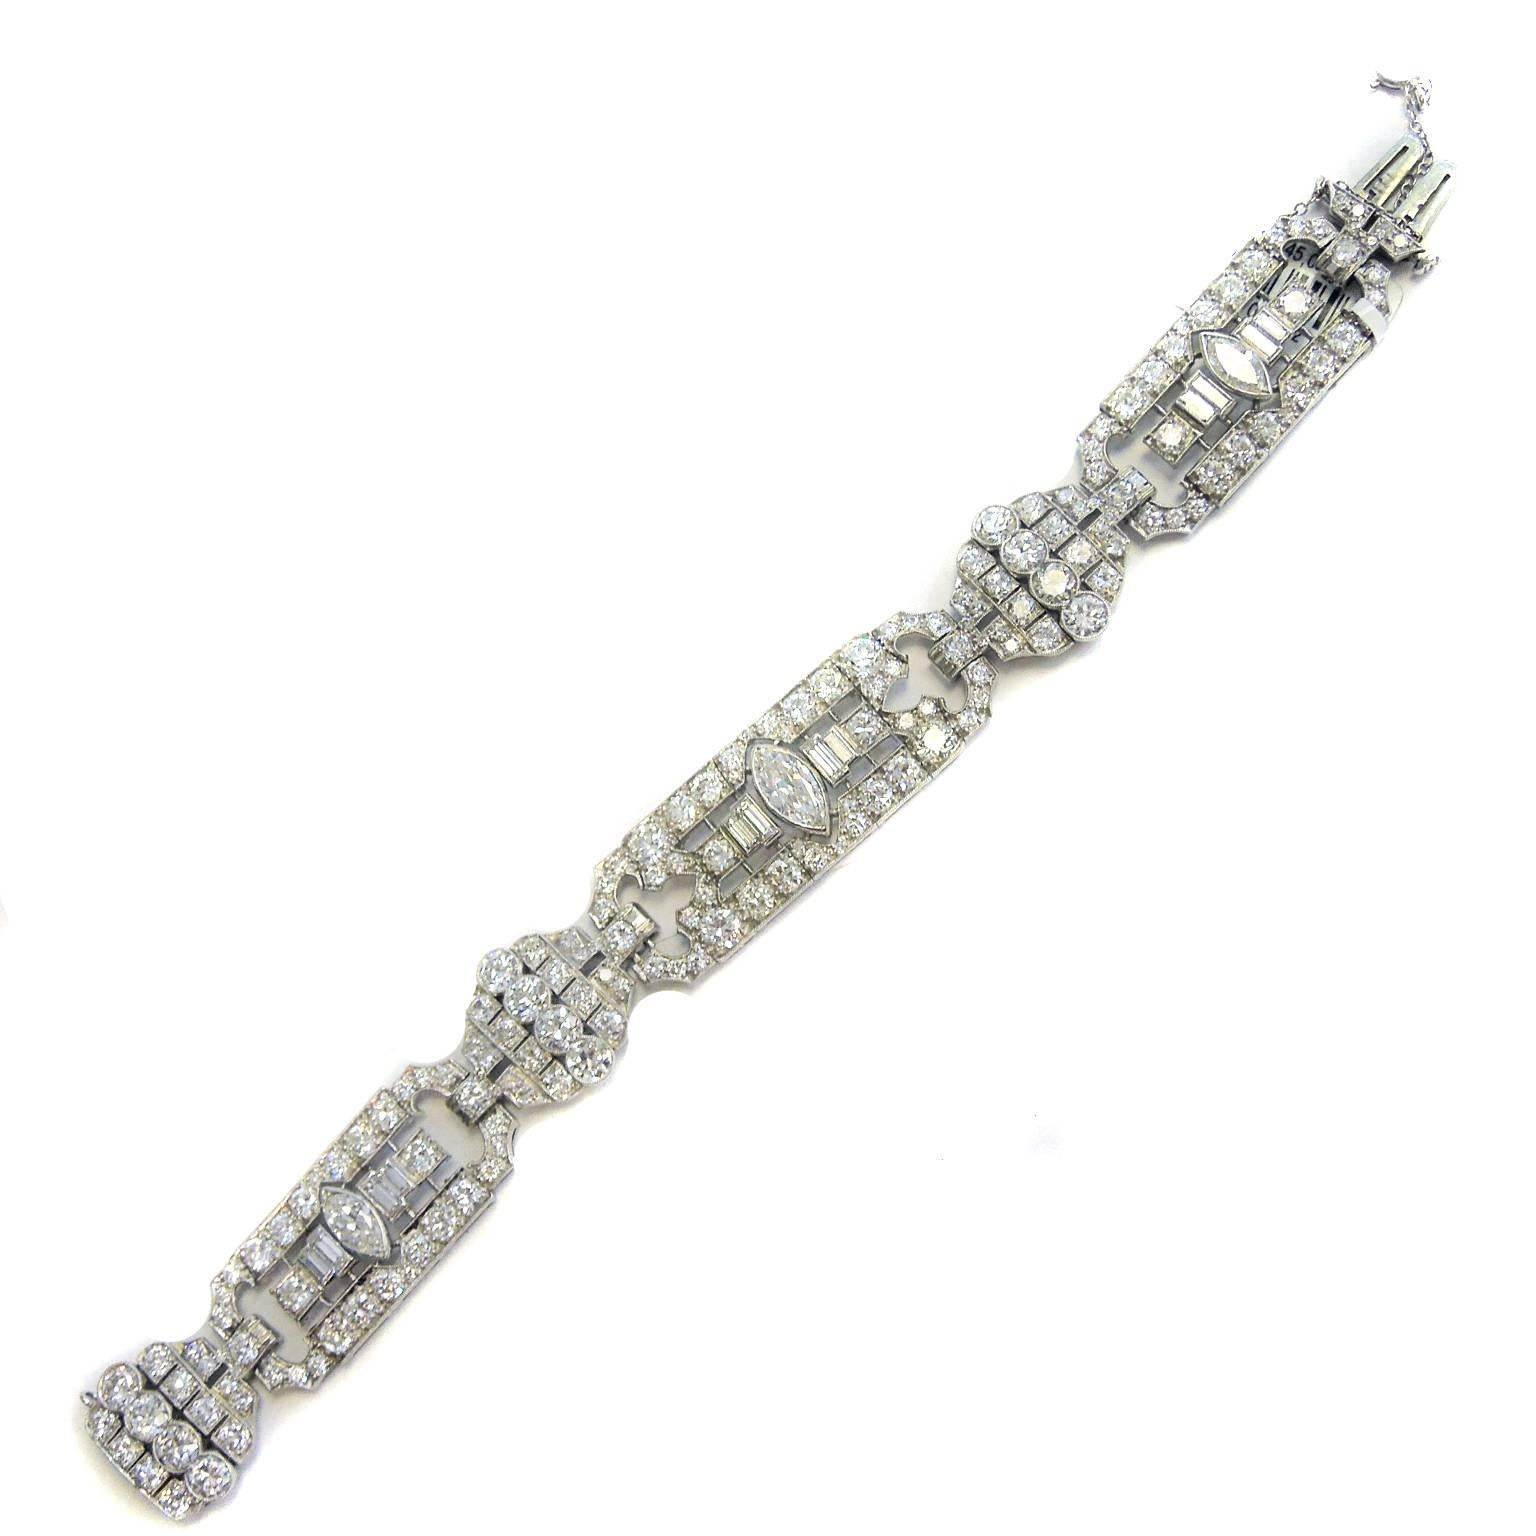 Platinum Bracelet with Marquis and Round cut diamonds

17.20ct. apprx. Total Weight Diamonds

Bracelet is done in Platinum

3 Marquis cut diamonds on bracelet.

6.5 inches length. 0.6 inch width

Safe clasp used